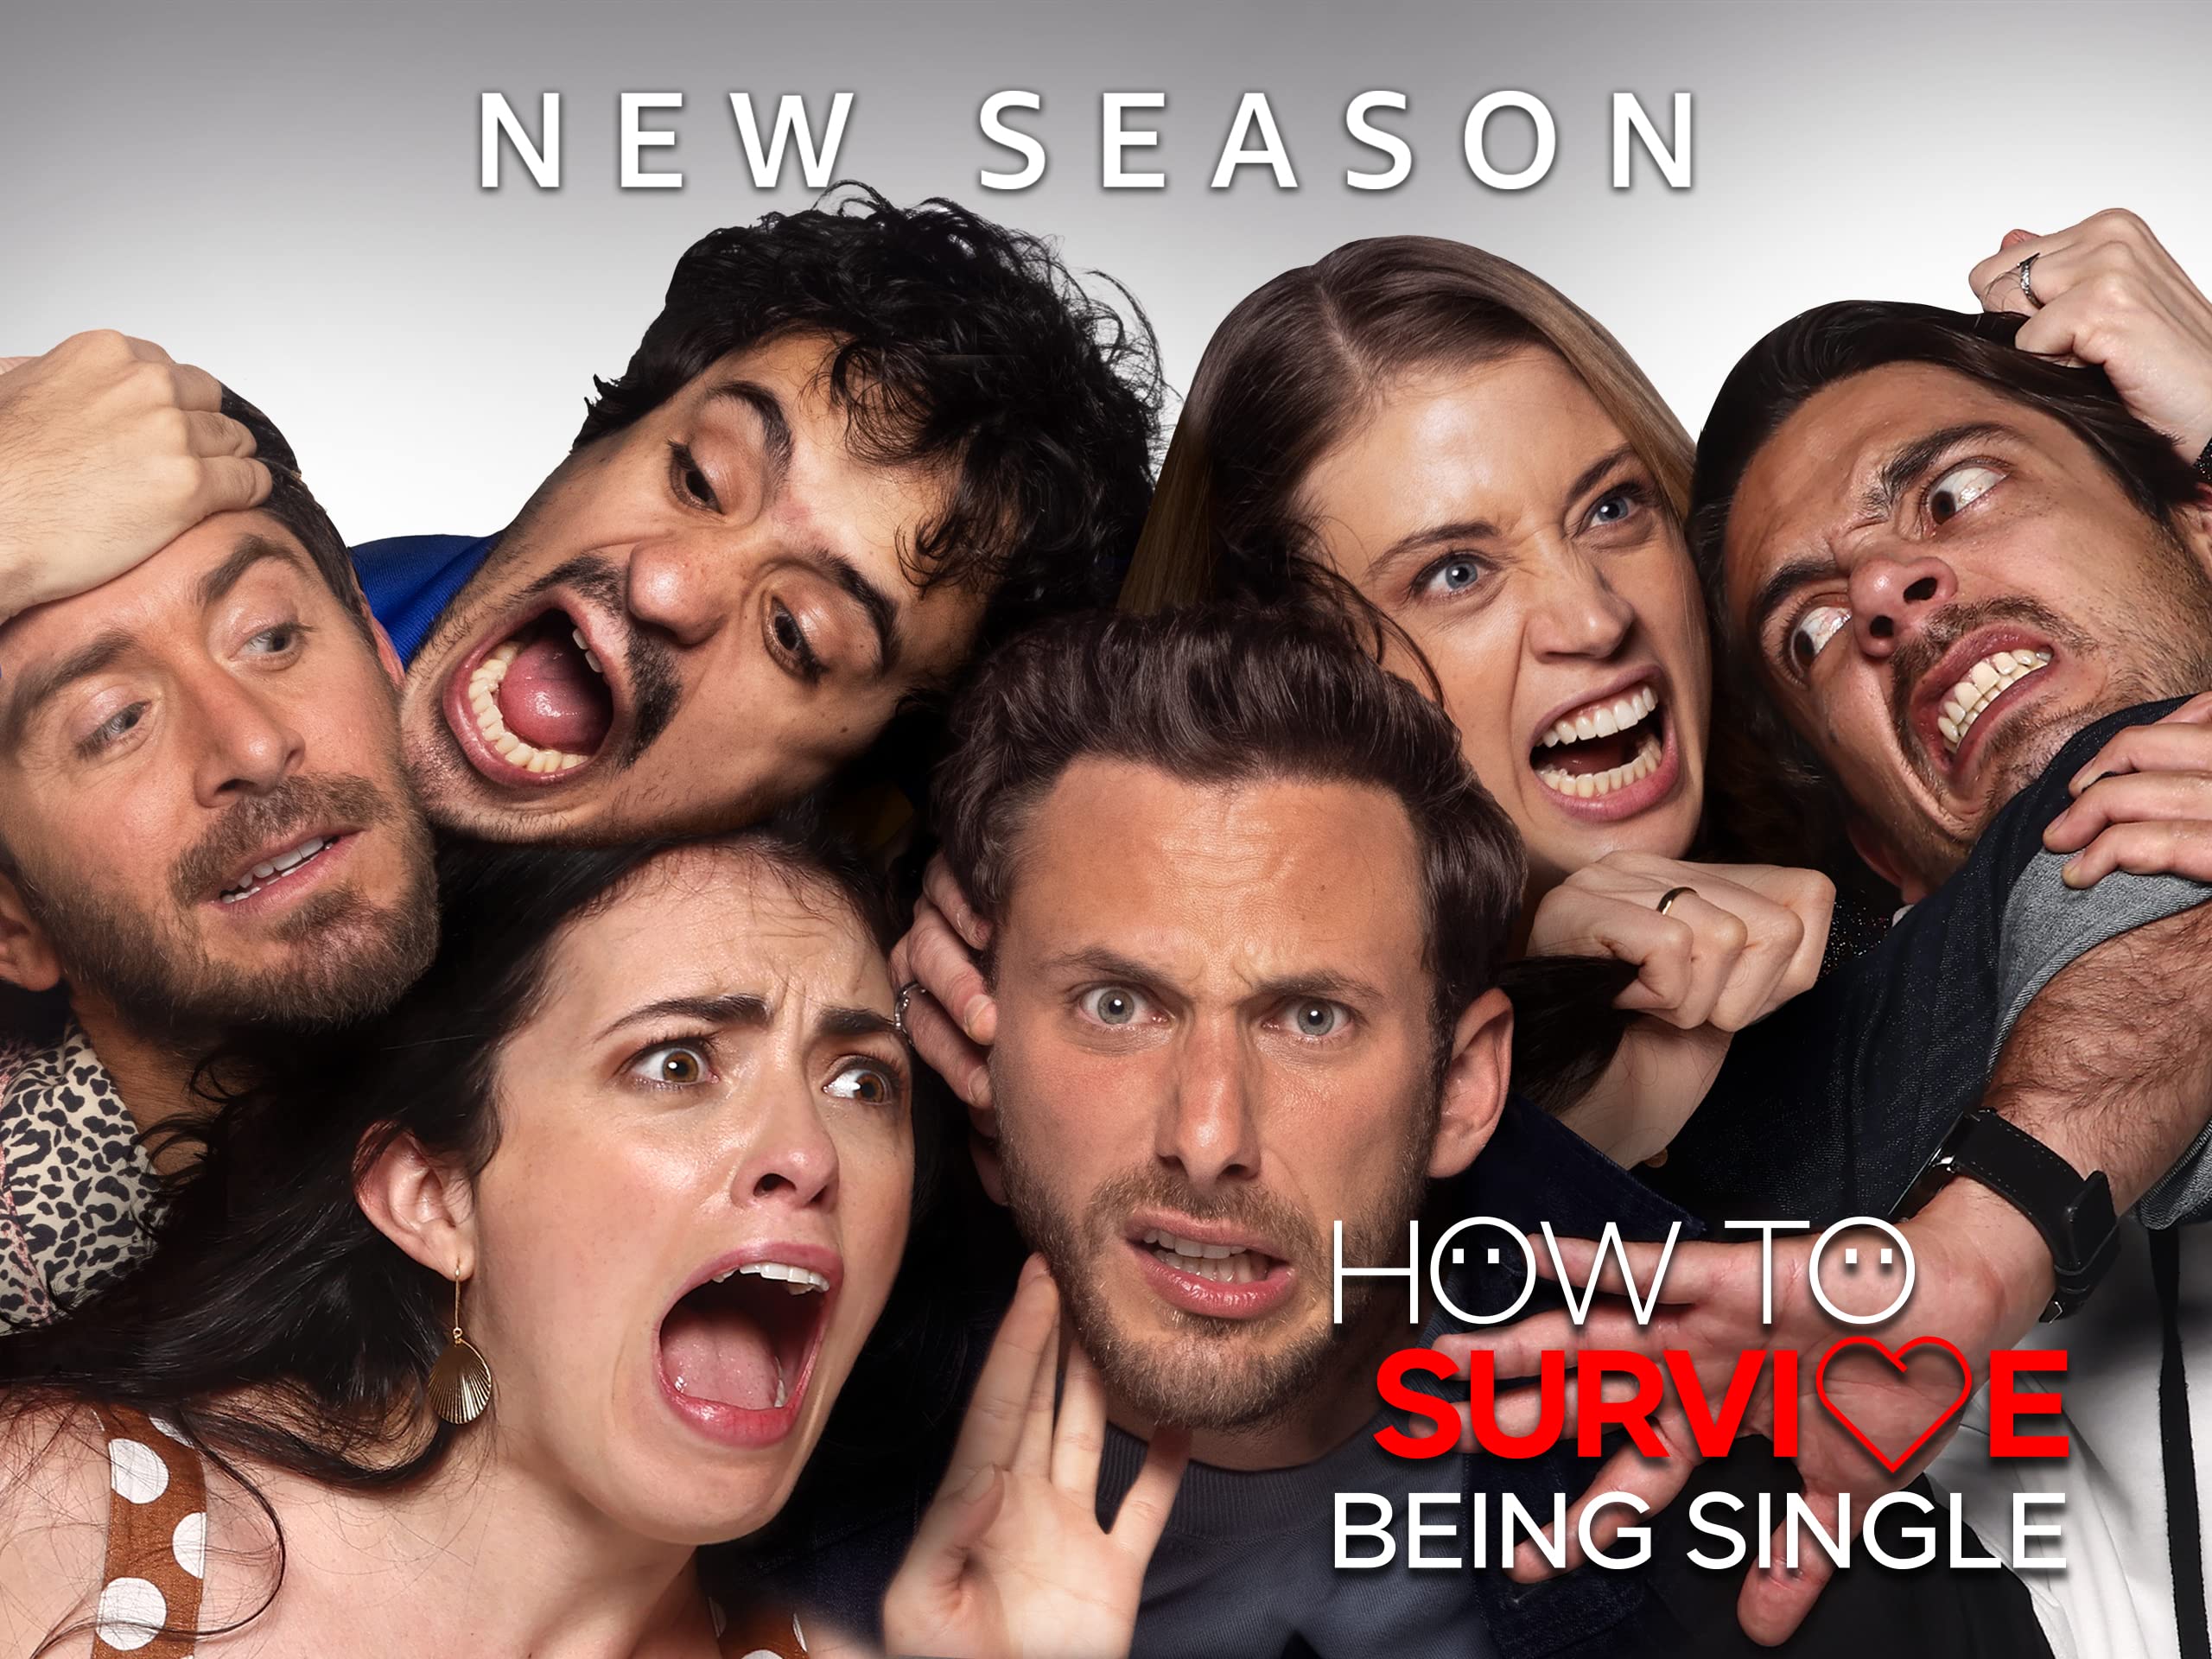 How to Survive Being Single Season 2